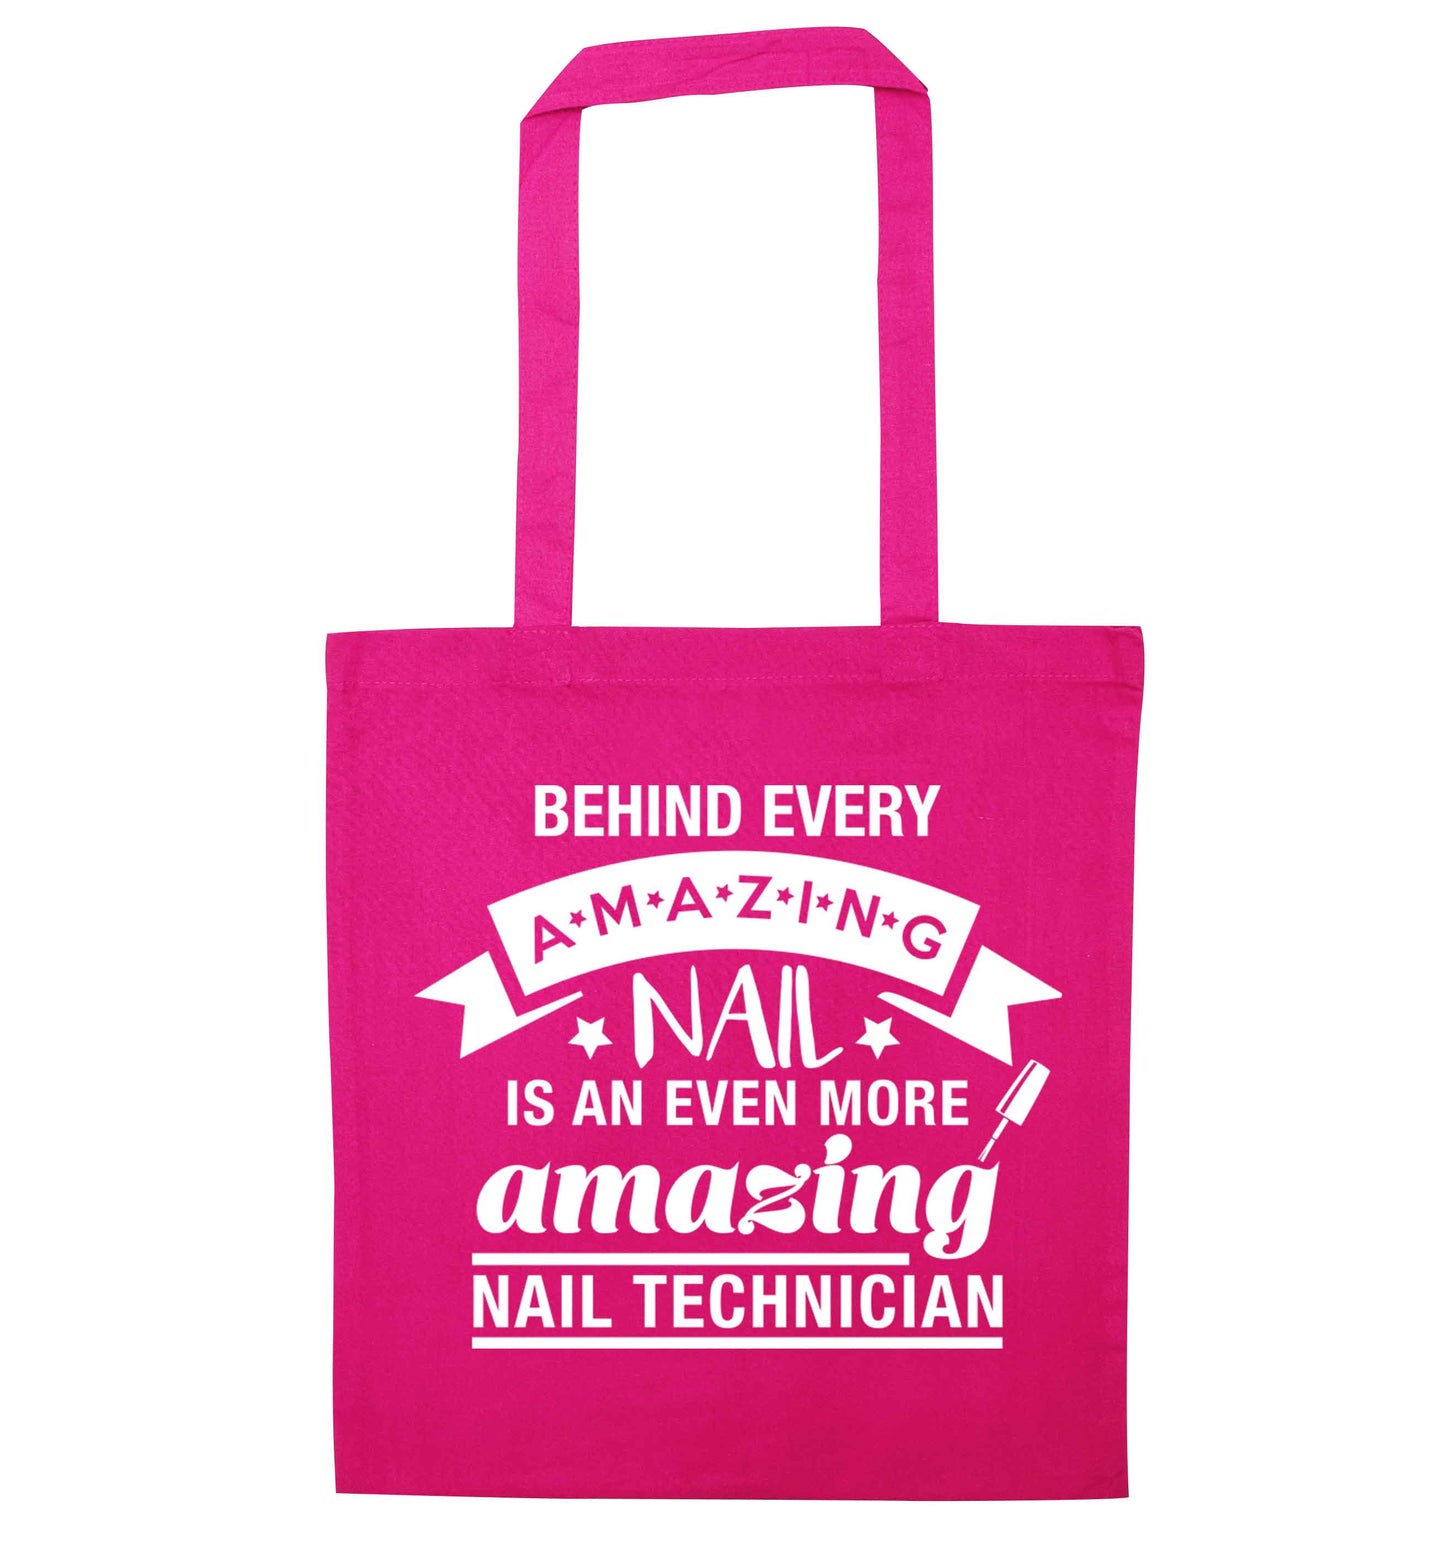 Behind every amazing nail is an even more amazing nail technician pink tote bag